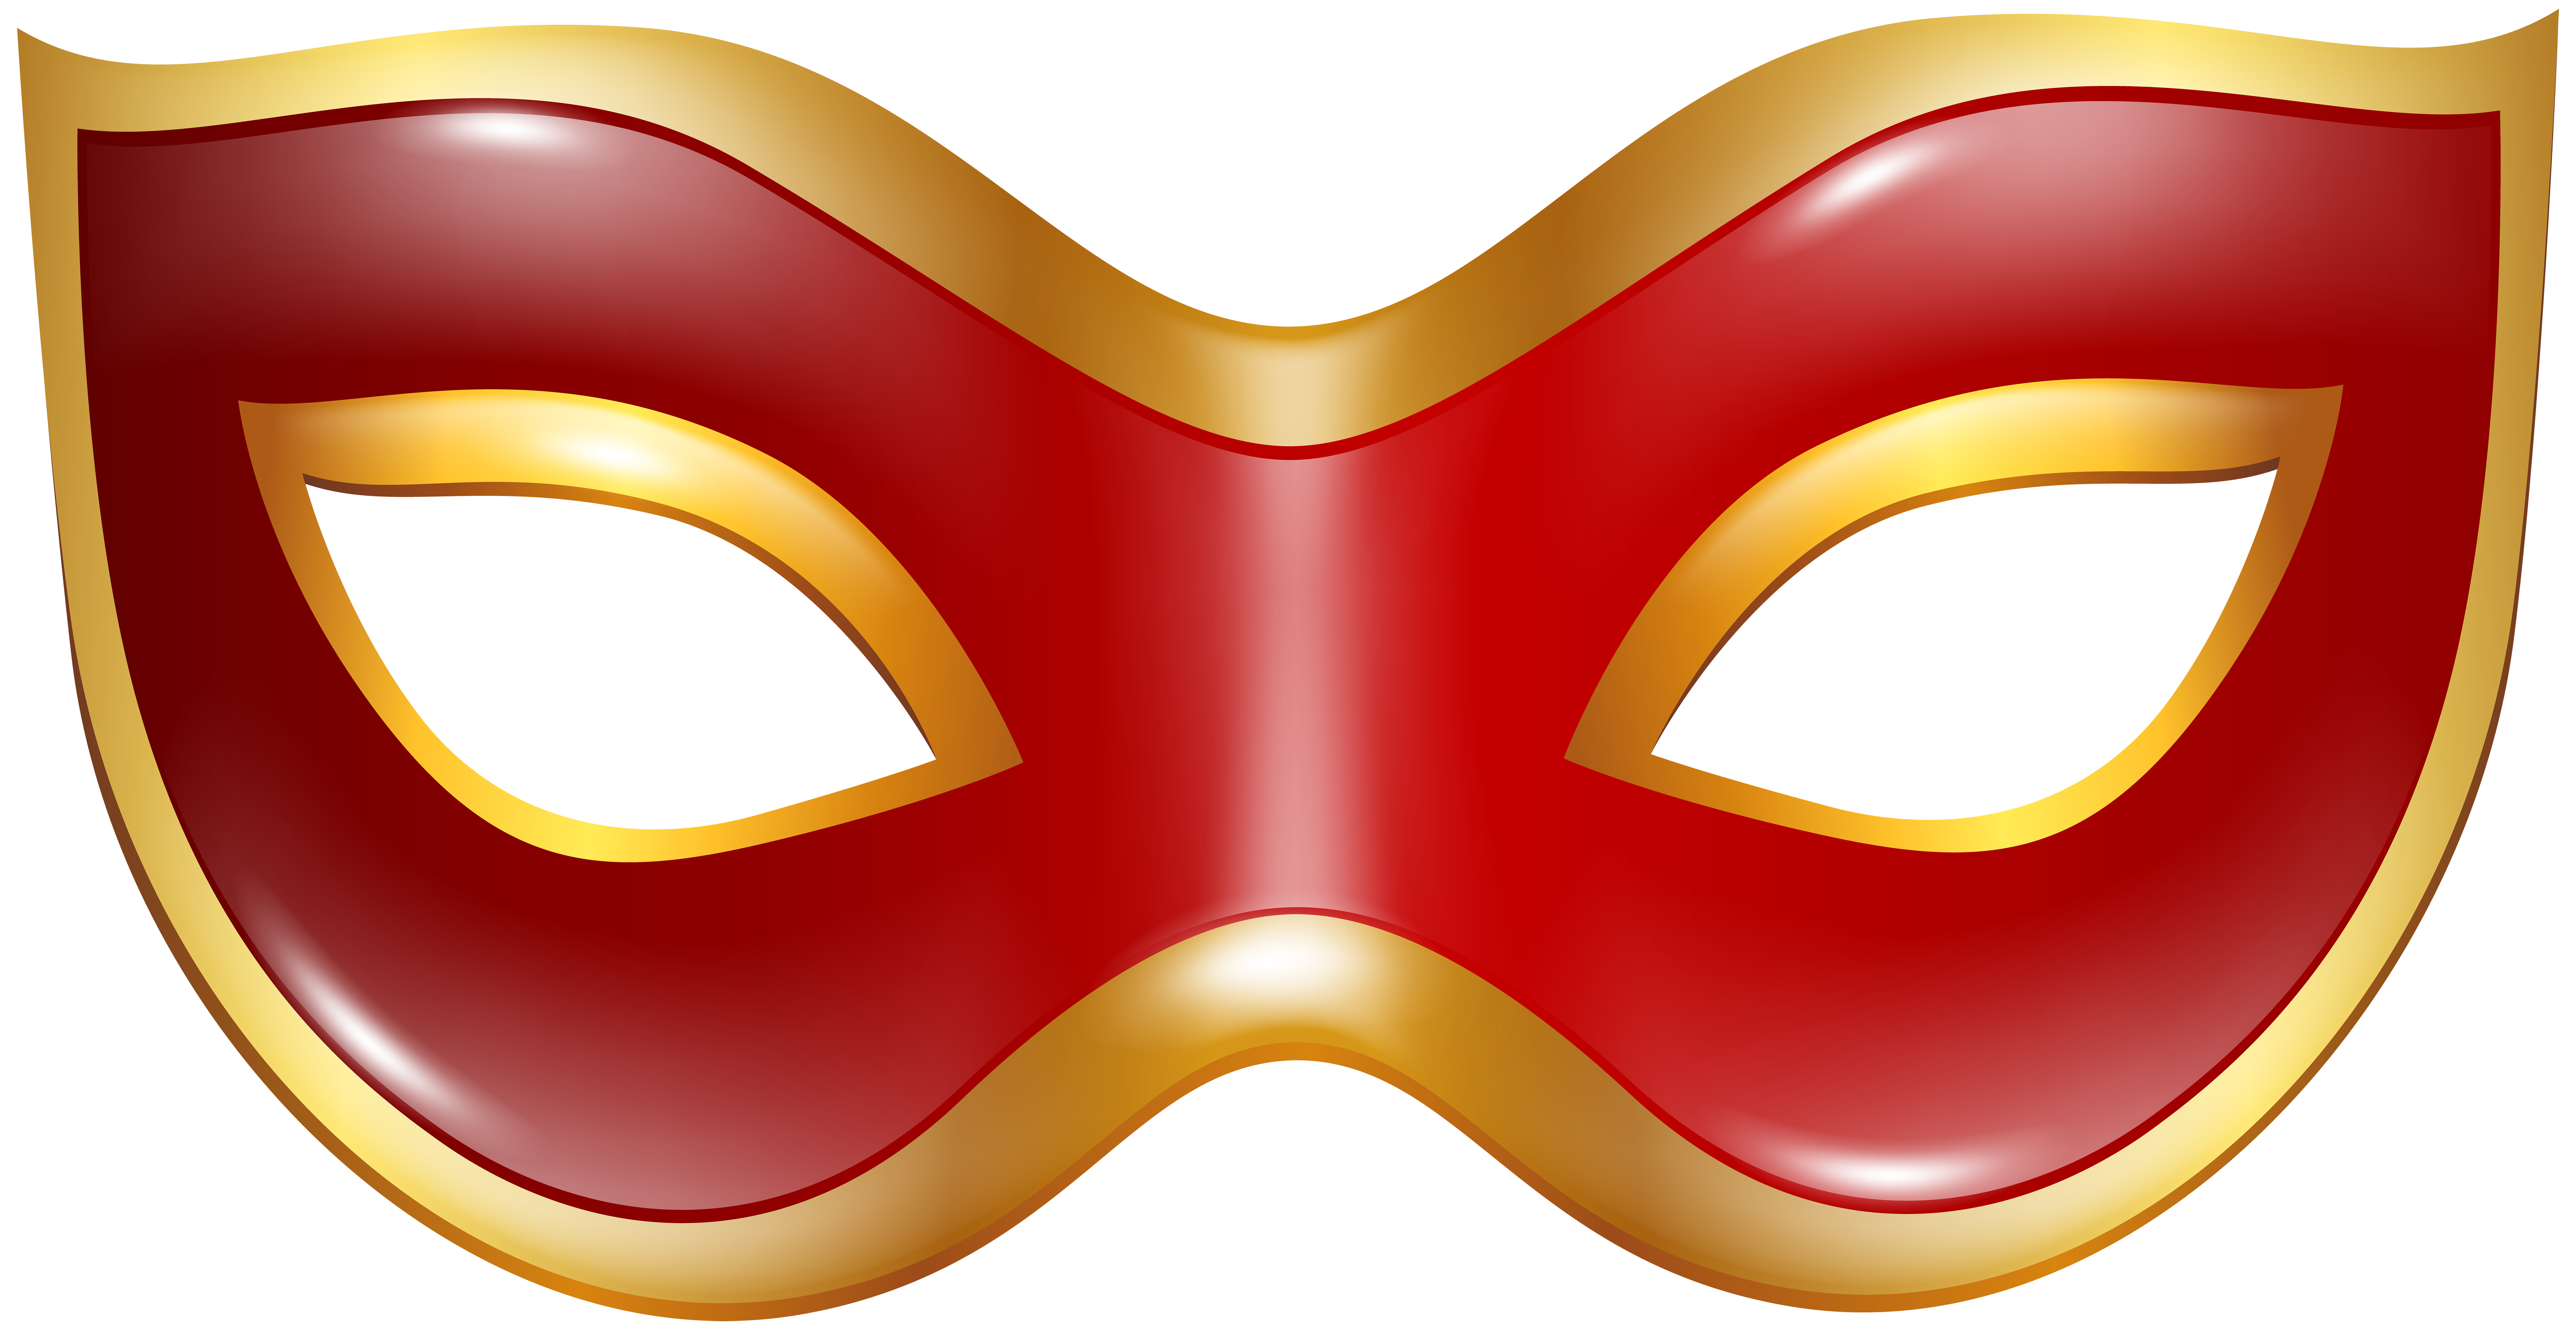 mask clipart yellow